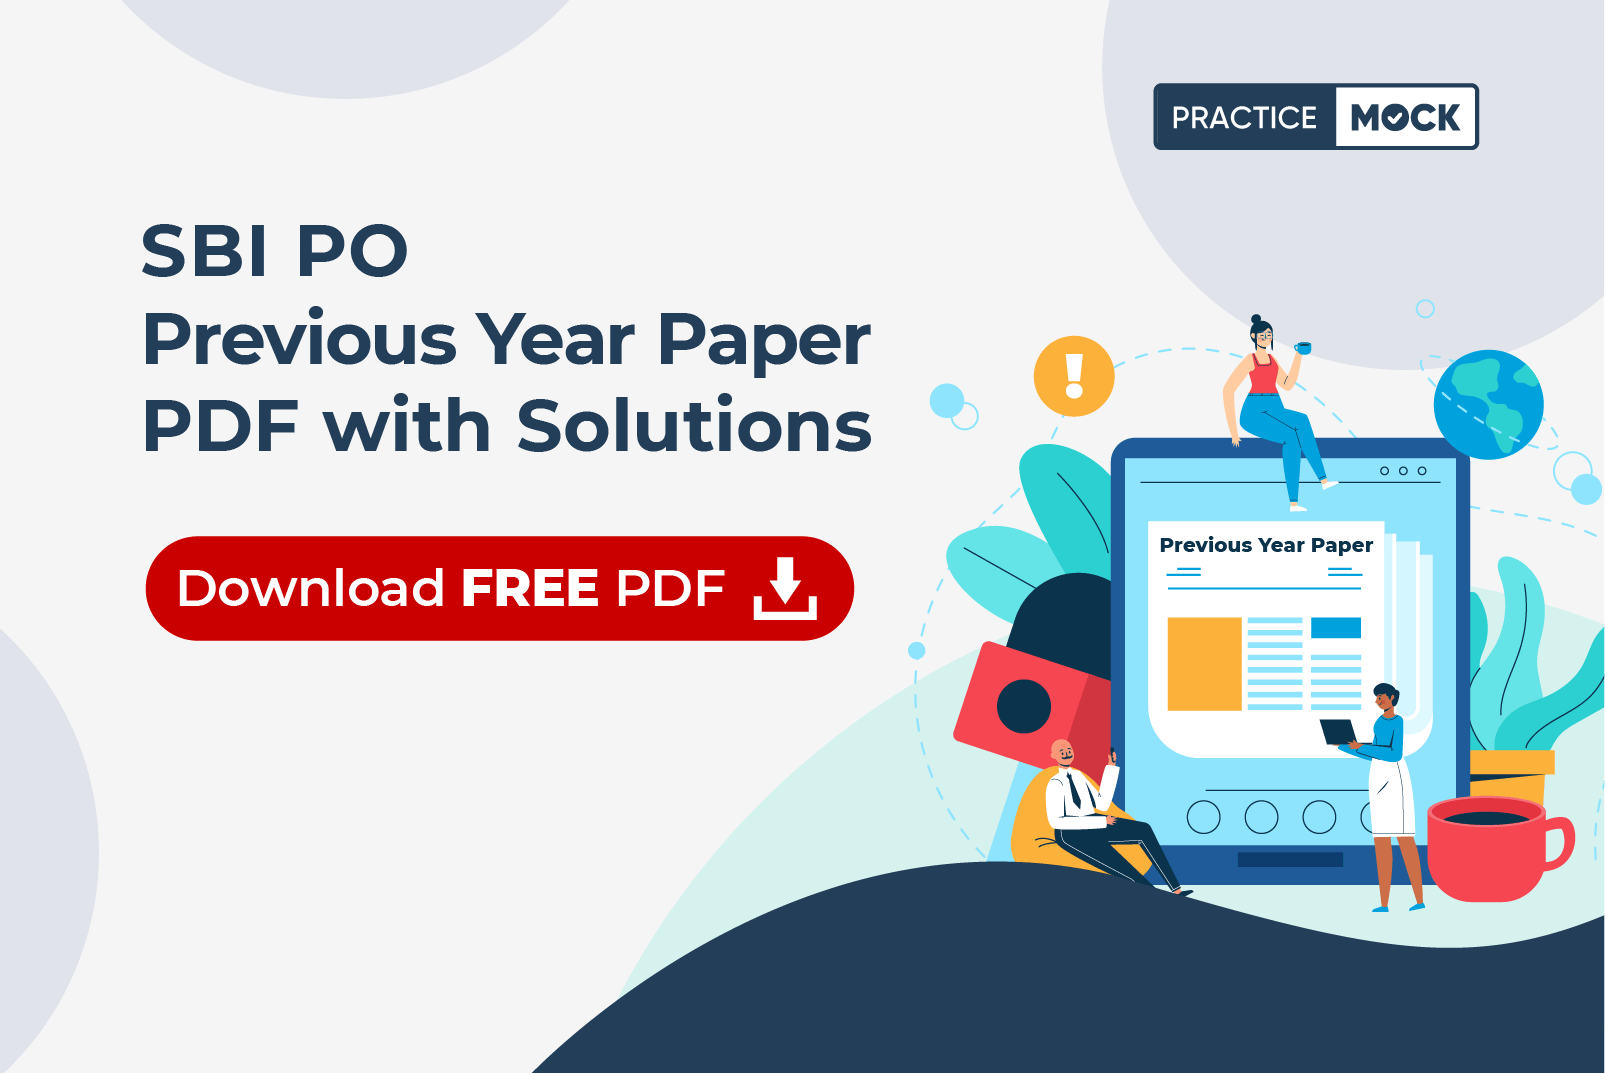 SBI PO Previous Year Paper